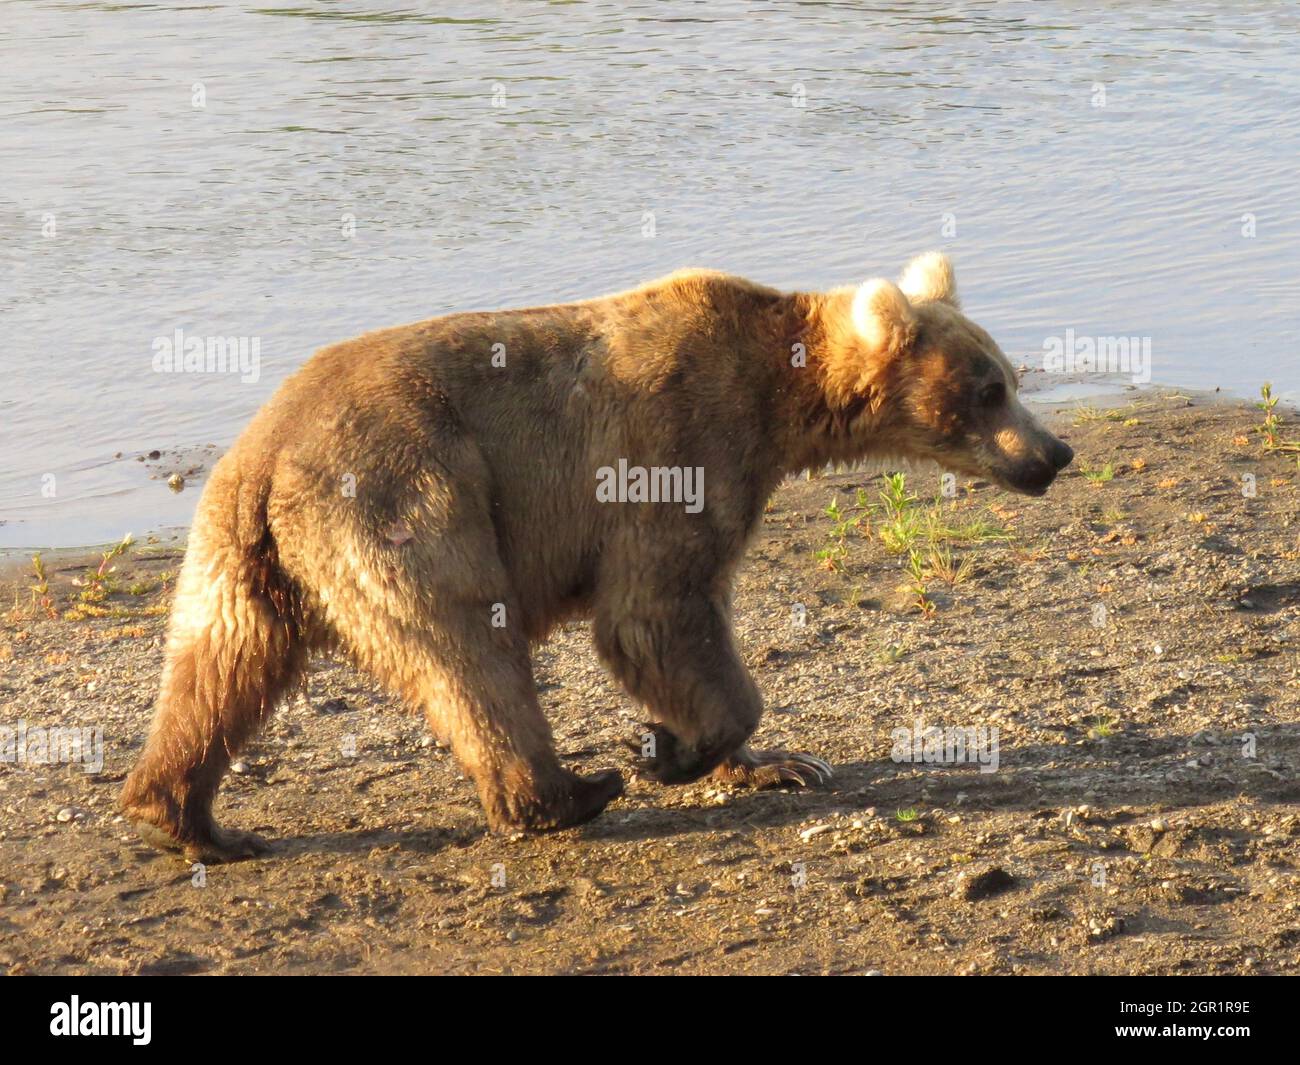 An adult brown bear known as Bear 435 looks for salmon on in the Brooks River at the start of the feeding season in Katmai National Park and Preserve June 24, 2020 near King Salmon, Alaska. Stock Photo